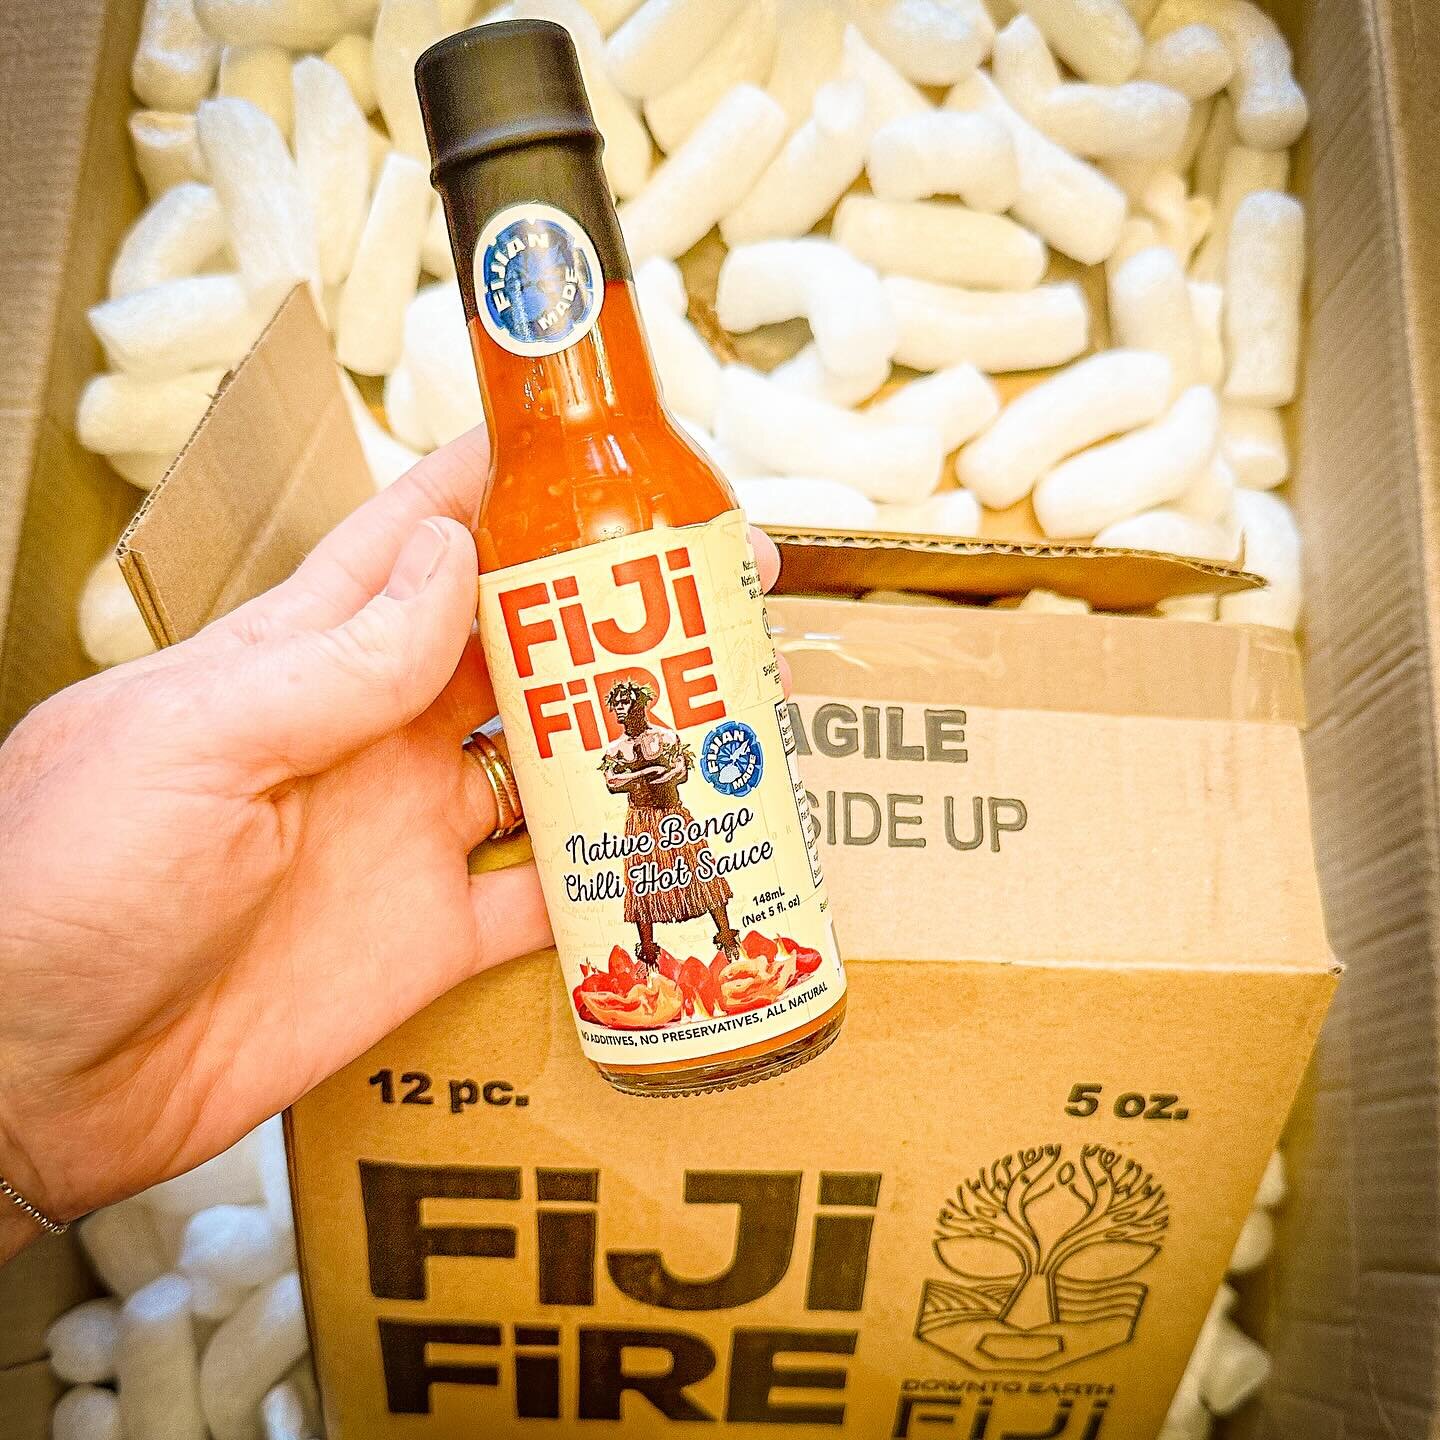 Welcome to my newest client @fijifirehotsauce 

Thrilled to be assisting this fantastic Fijian based independent business with social media management, content production and recipe creation.

Not only is the product delicious, their brand story and 